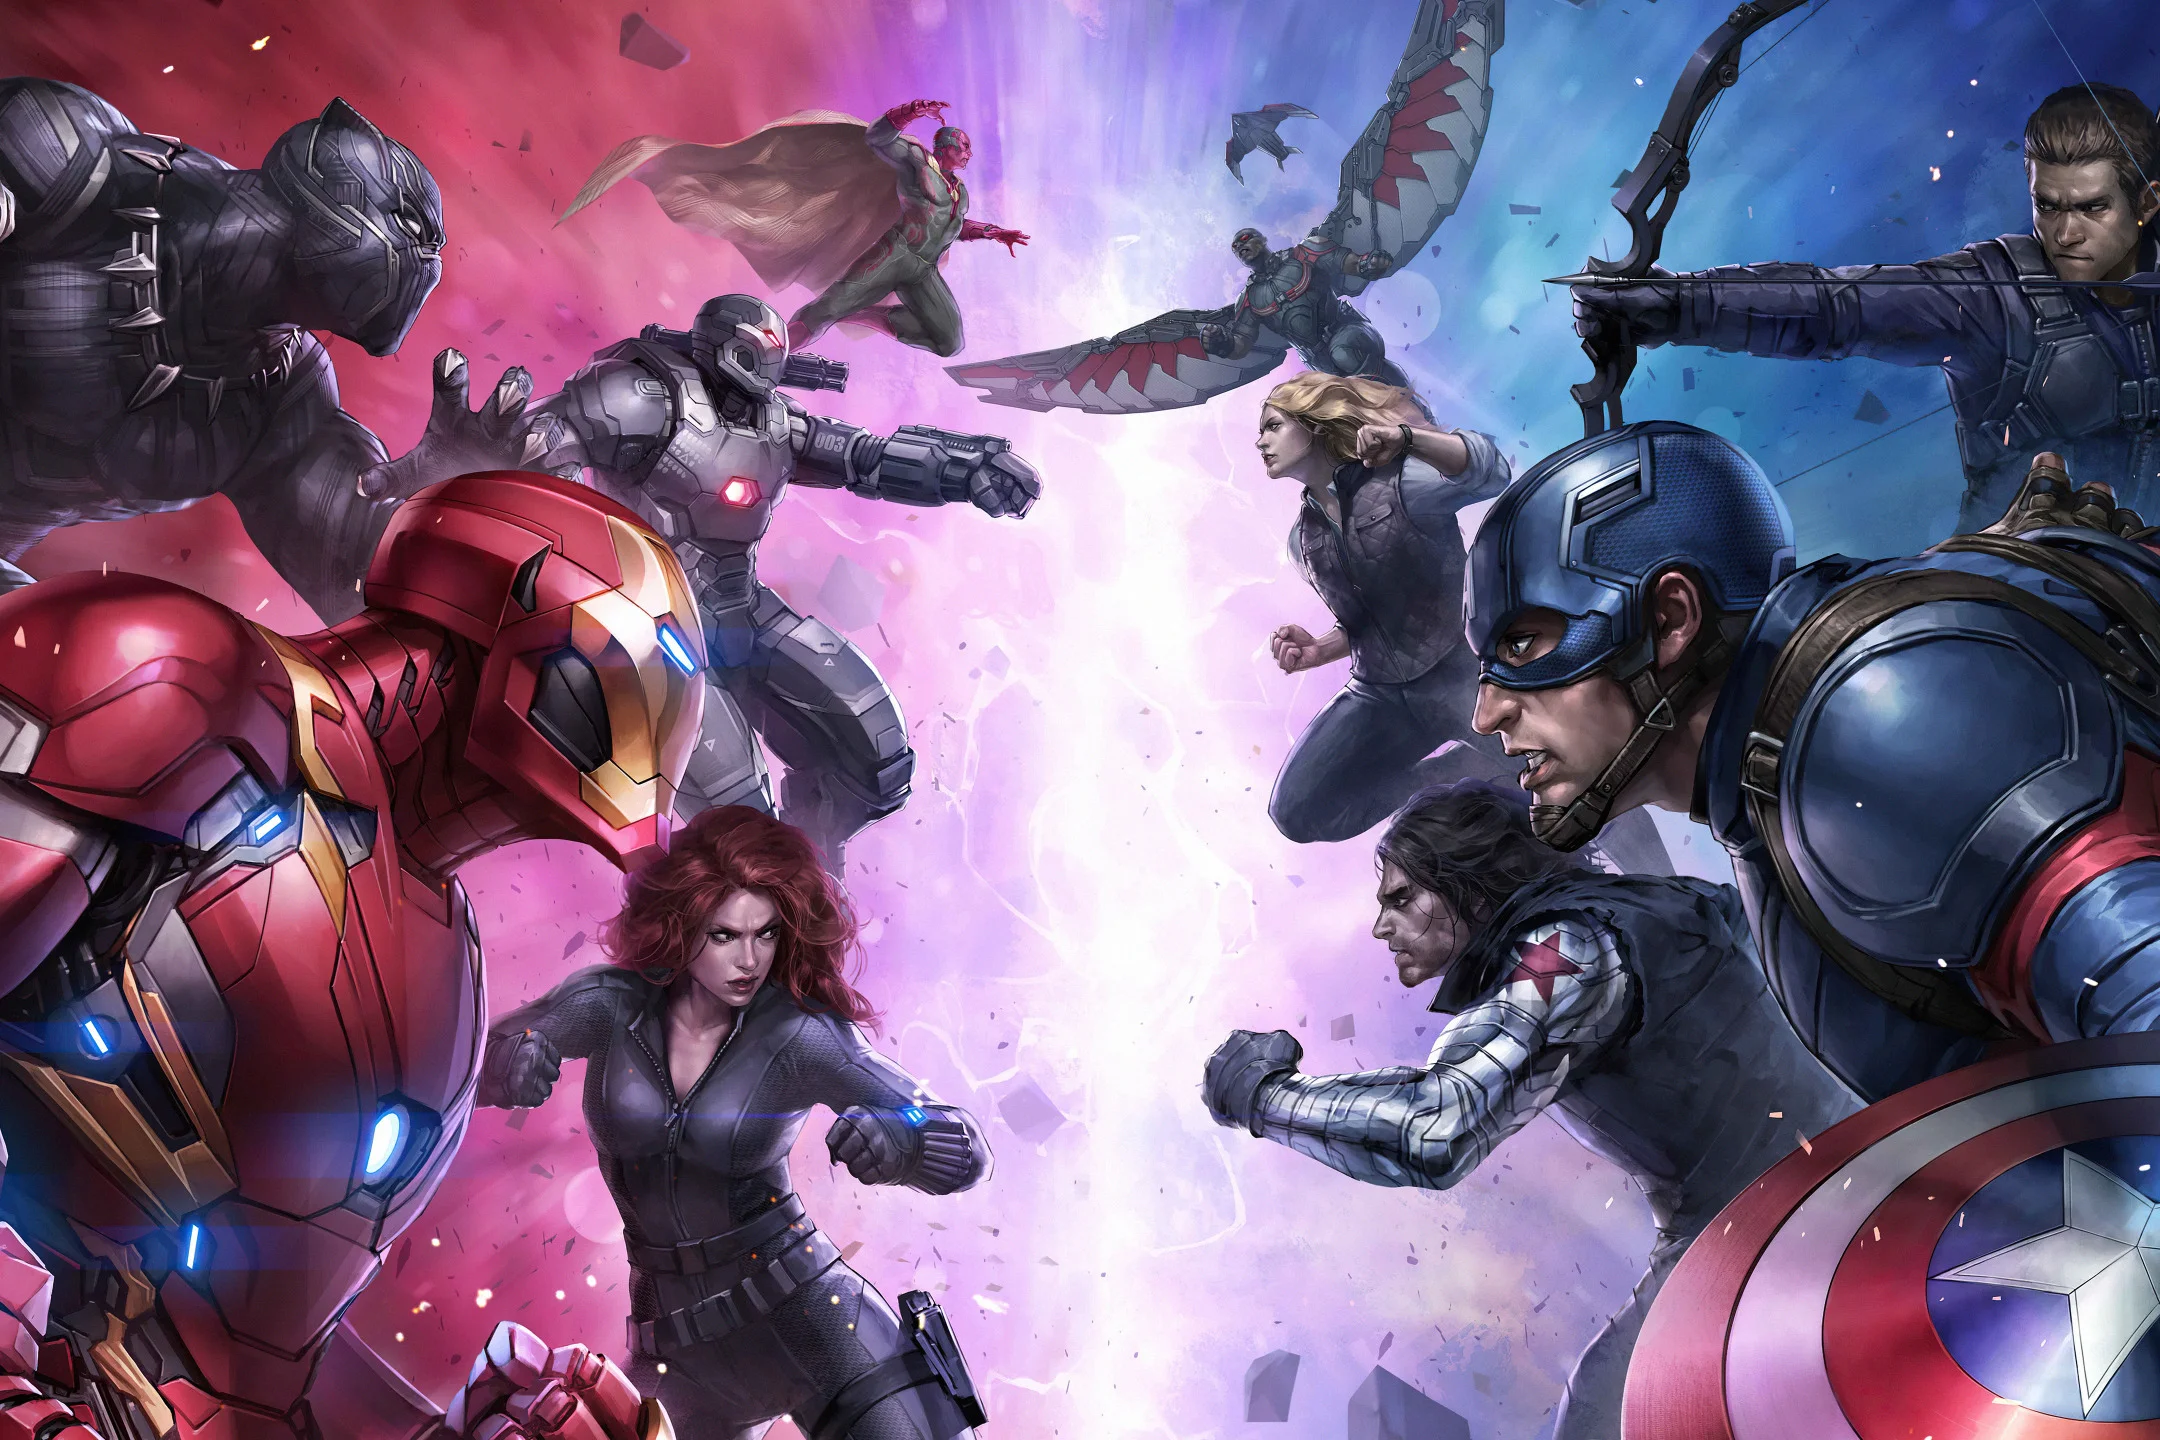 Marvel comics are developing a multiplayer third-person shooter